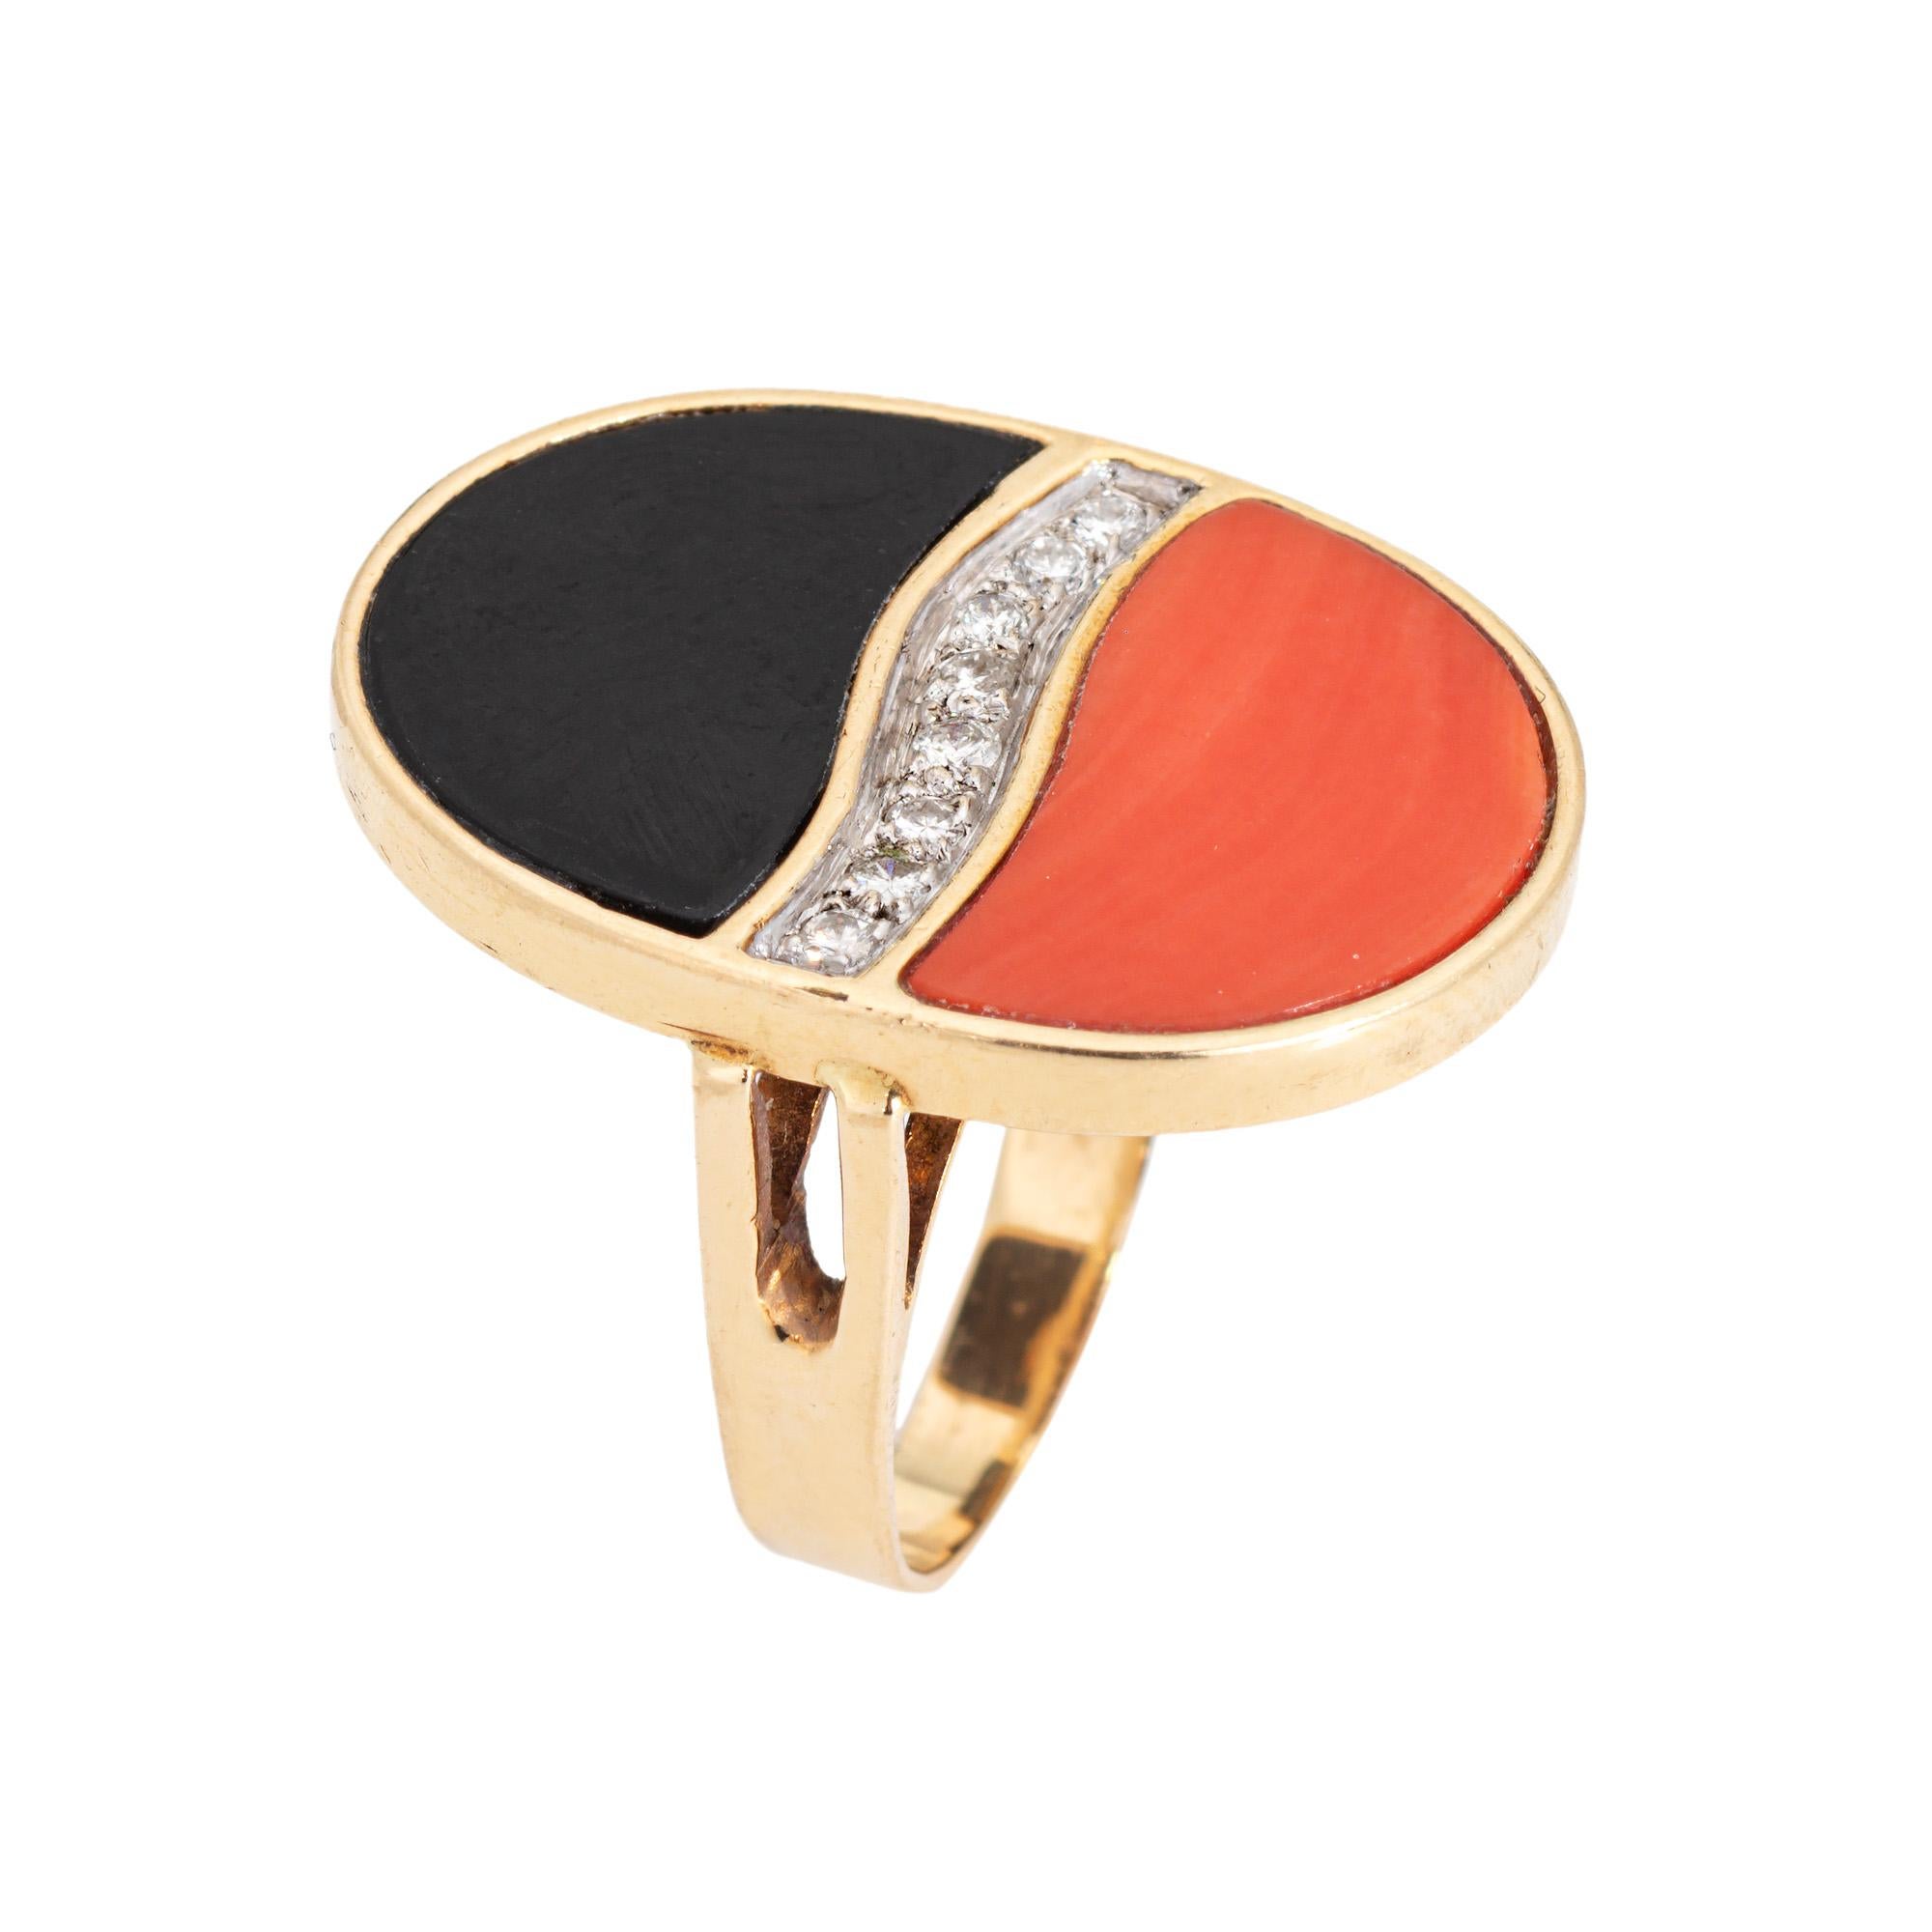 Finely detailed vintage coral & onyx cocktail ring (circa 1970s) crafted in 14k yellow gold. 

Onyx & coral measures 16mm x 9mm. Diamonds total an estimated 0.05 carats (estimated at H-I color and SI1-I1 clarity). The onyx and coral are in very good